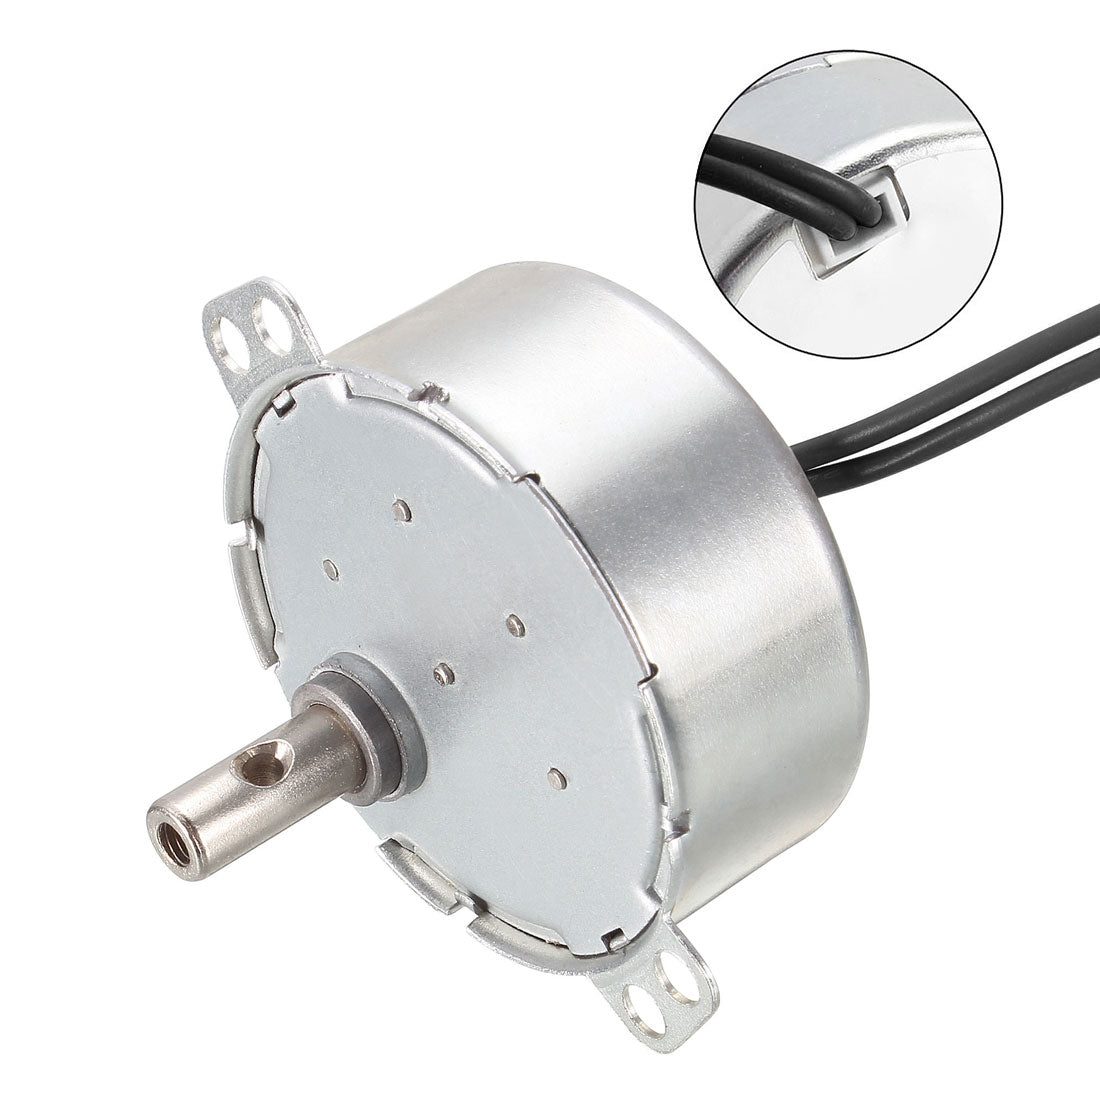 uxcell Uxcell Synchronous Motor AC 220-240V 2.5-3RPM 50-60Hz CCW/CW 4W Reduction Gear Motor